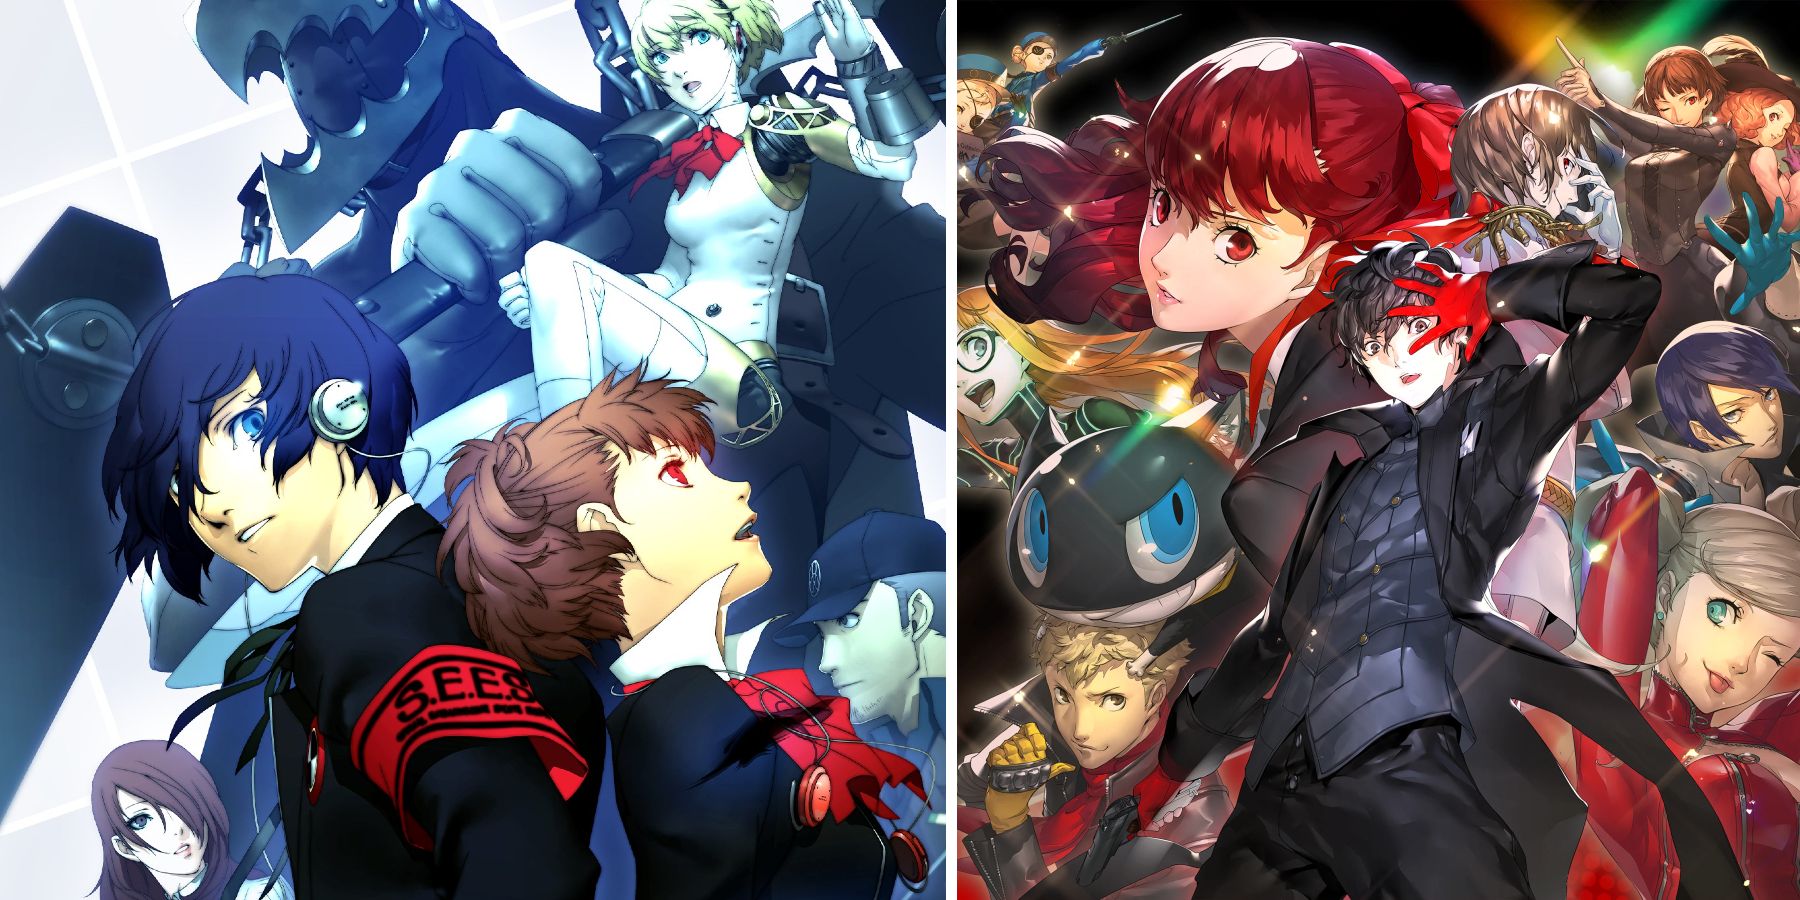 Mechanics That a Persona 3 Remake Should Take From Persona 5 Royal